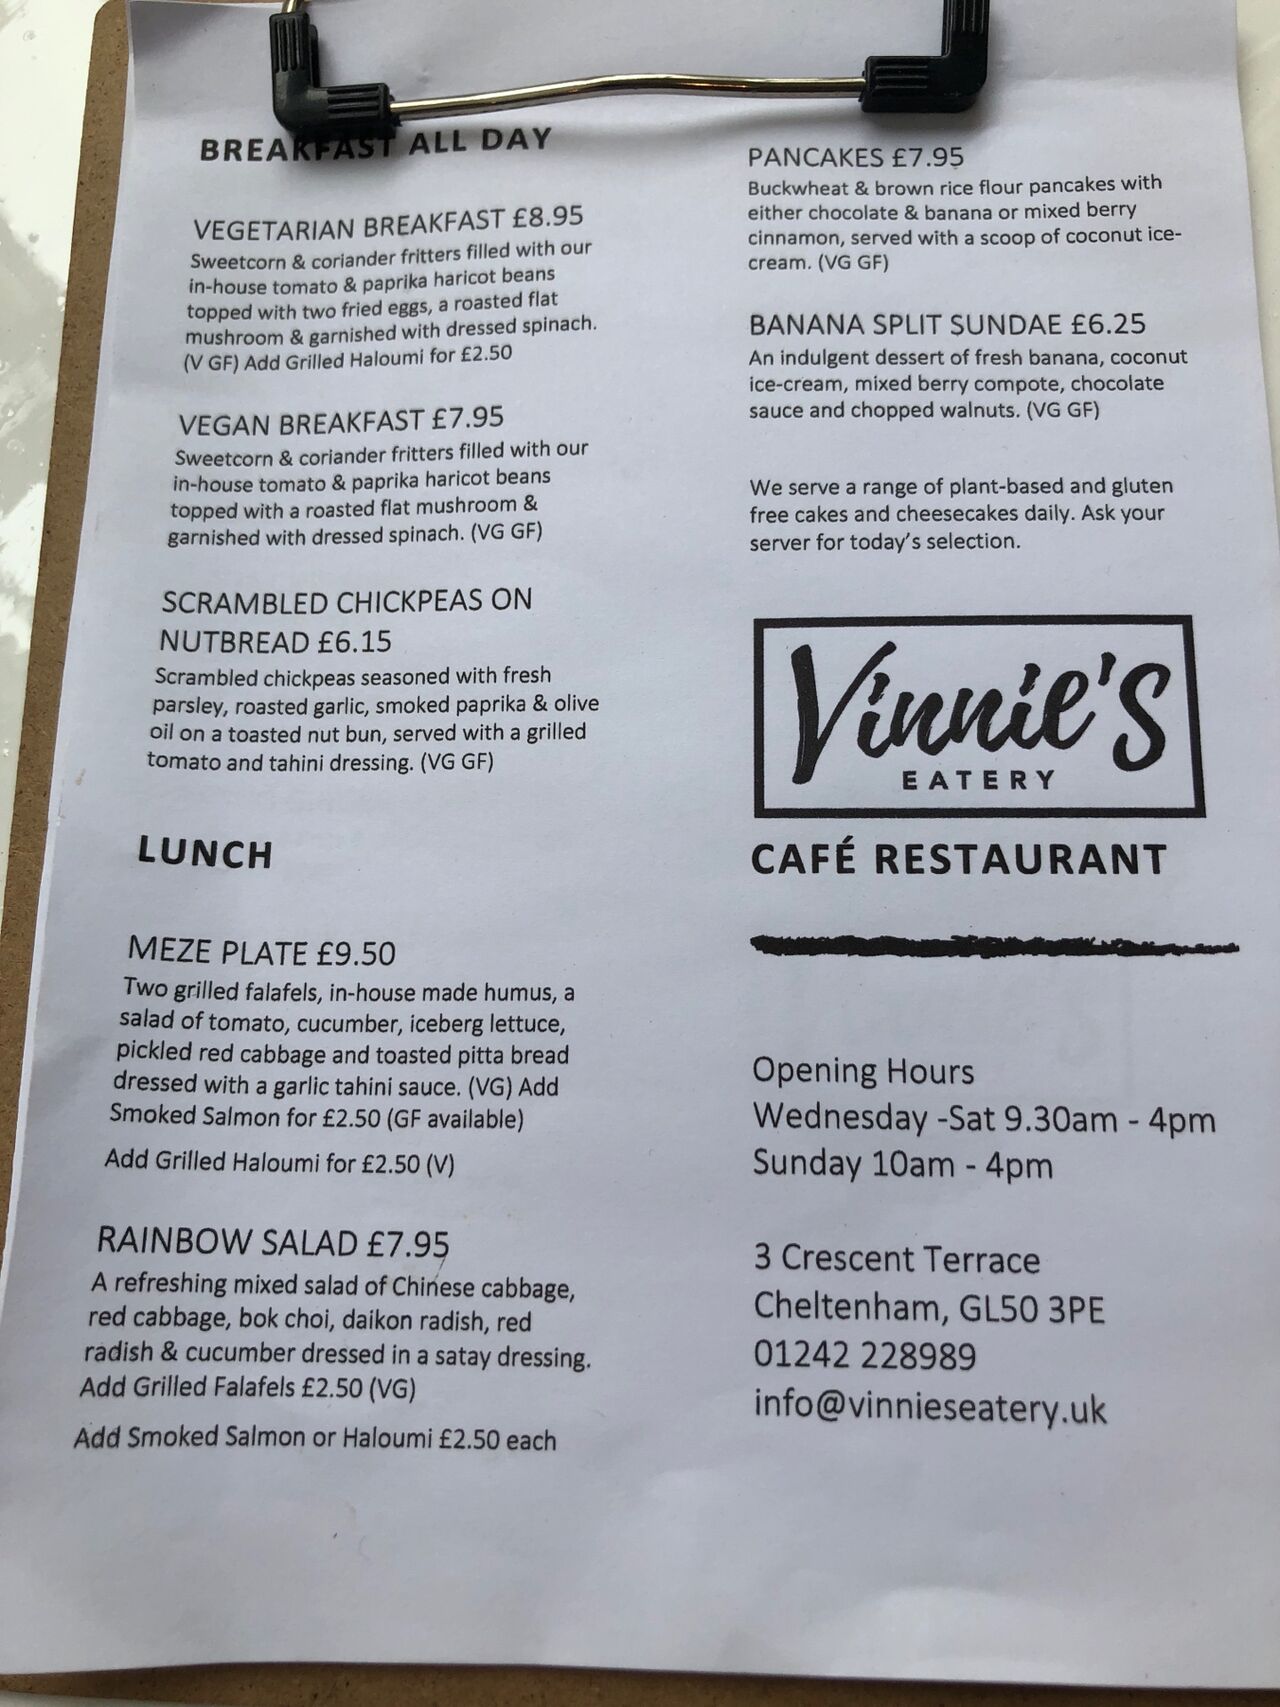 A photo of Vinnie's Eatery